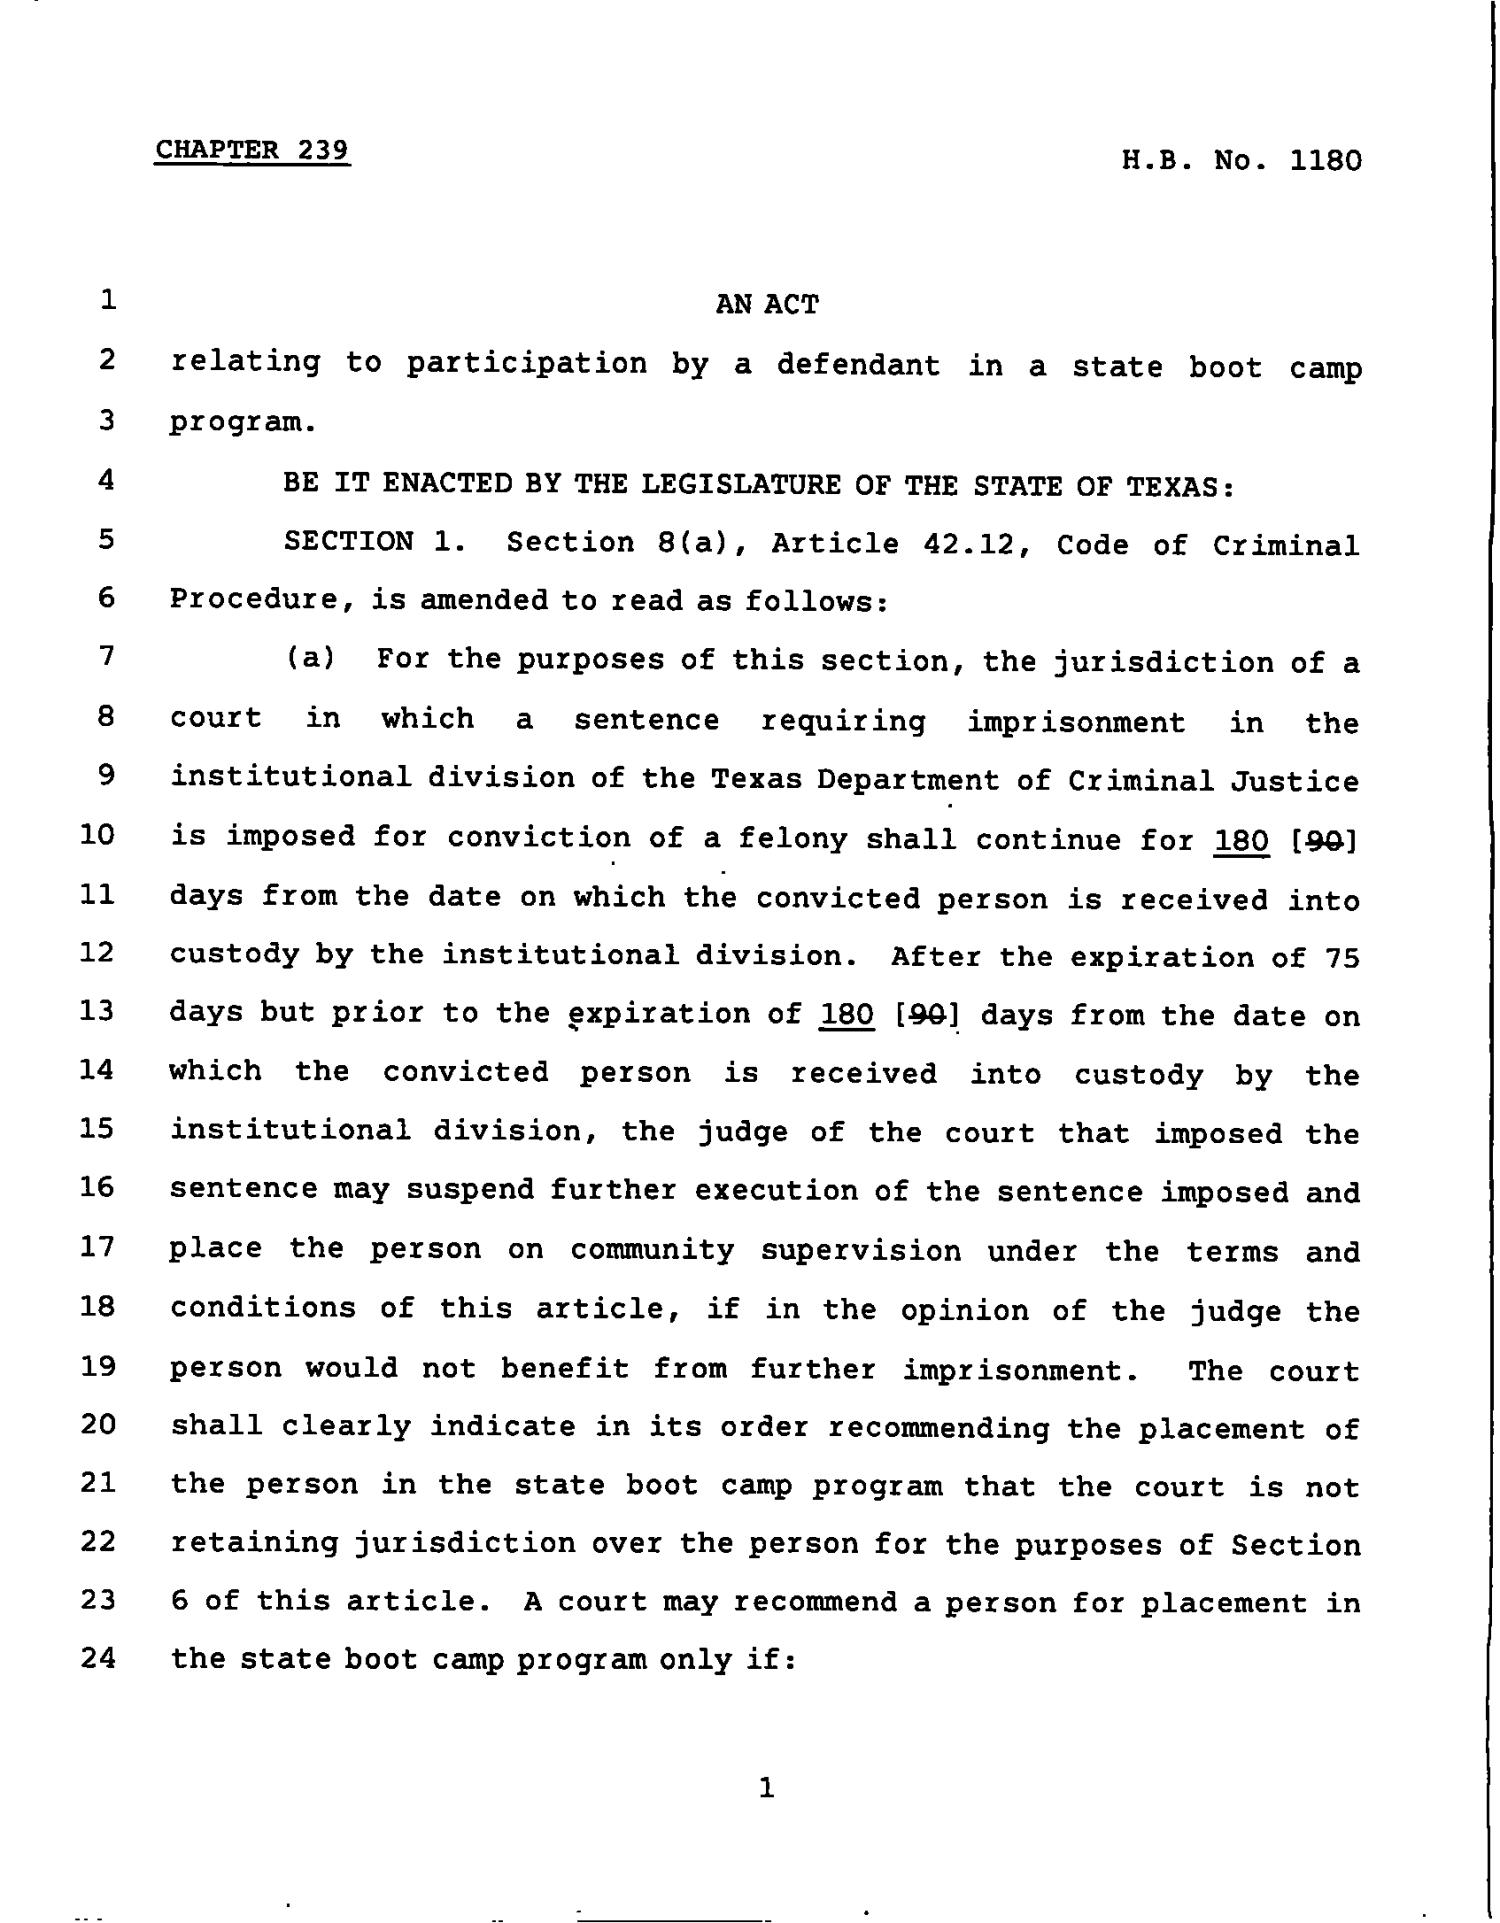 78th Texas Legislature, Regular Session, House Bill 1180, Chapter 239
                                                
                                                    [Sequence #]: 1 of 4
                                                